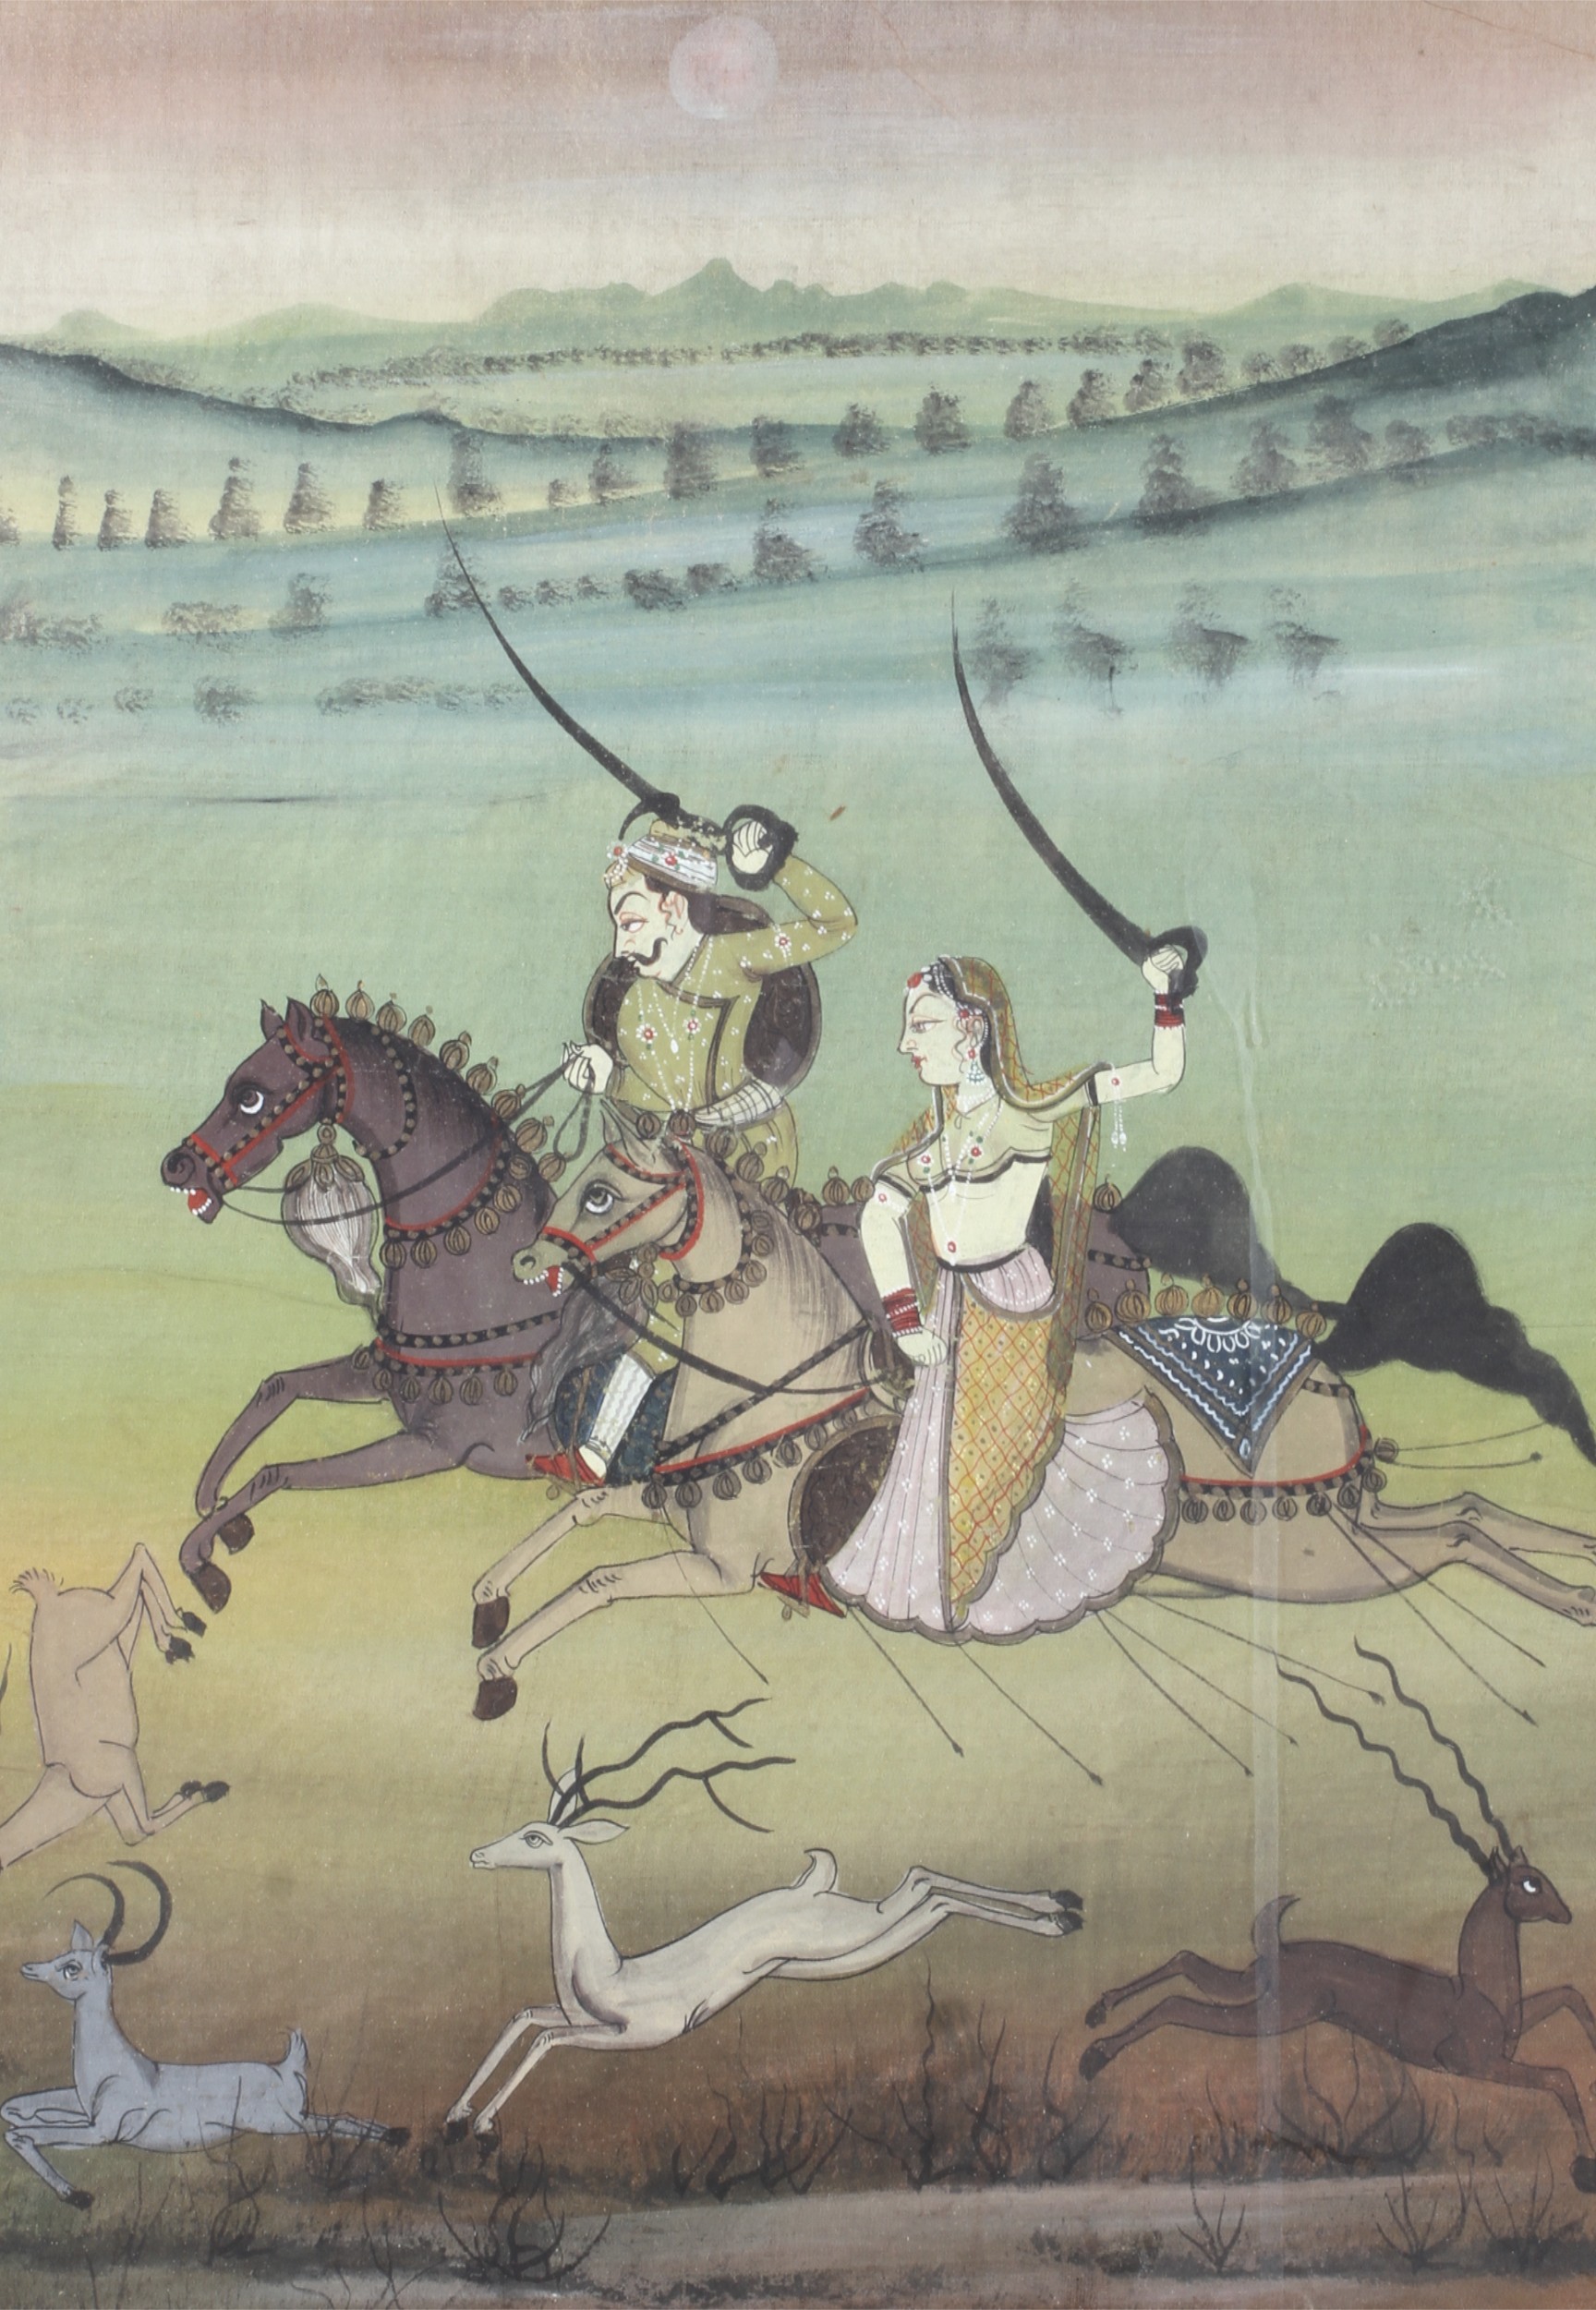 A 20th century Indian painting on fabric depicting a huntsman and women on horseback.